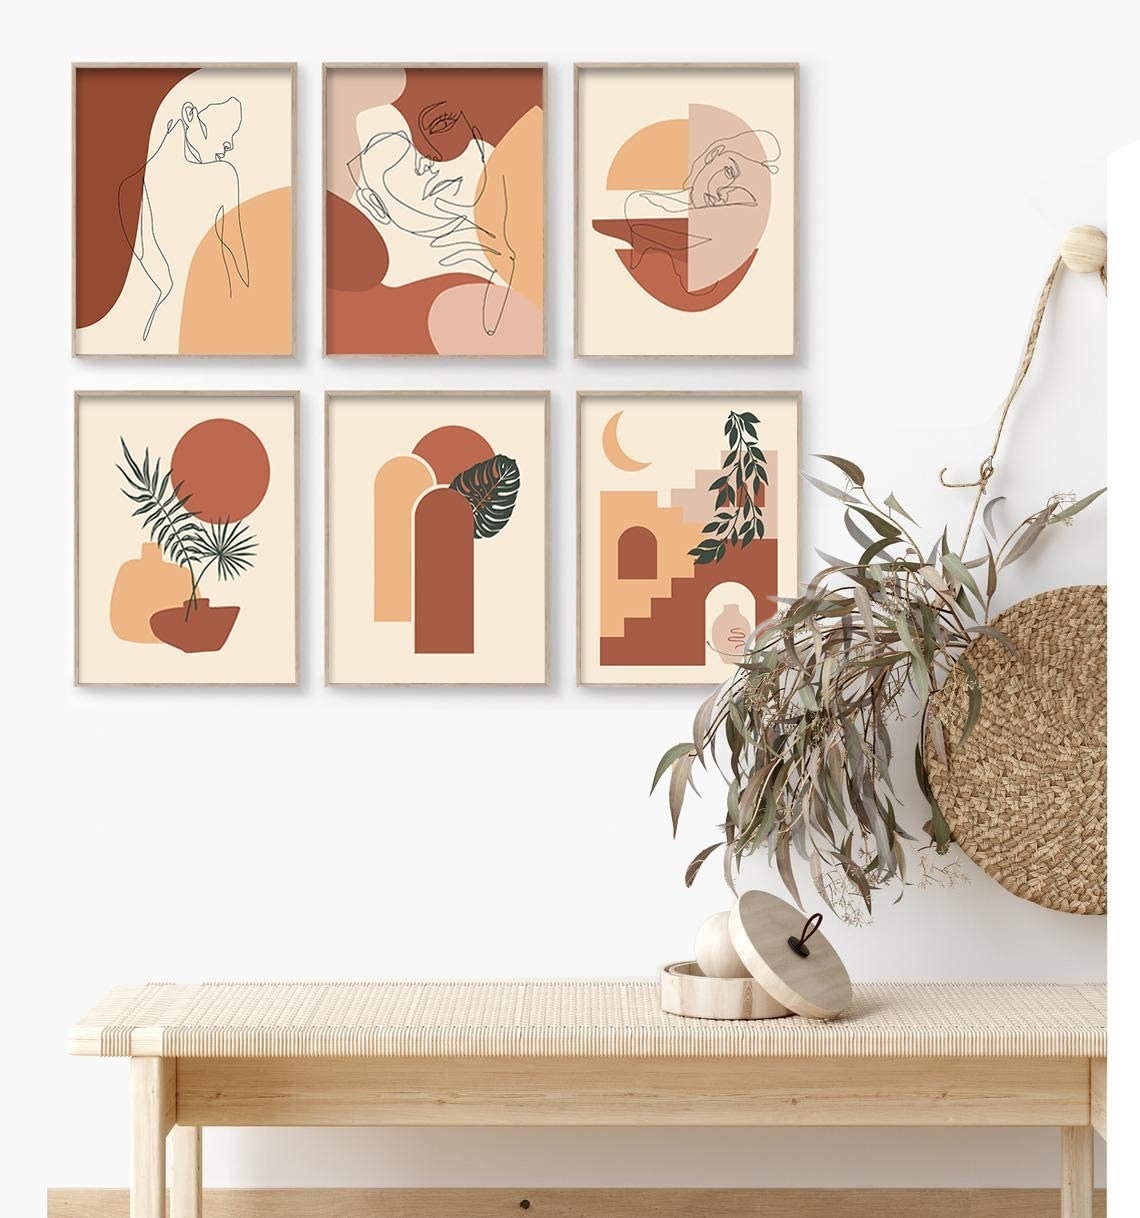 A set of six frames hanging up on a wall above a bench and a bag hanging on the wall